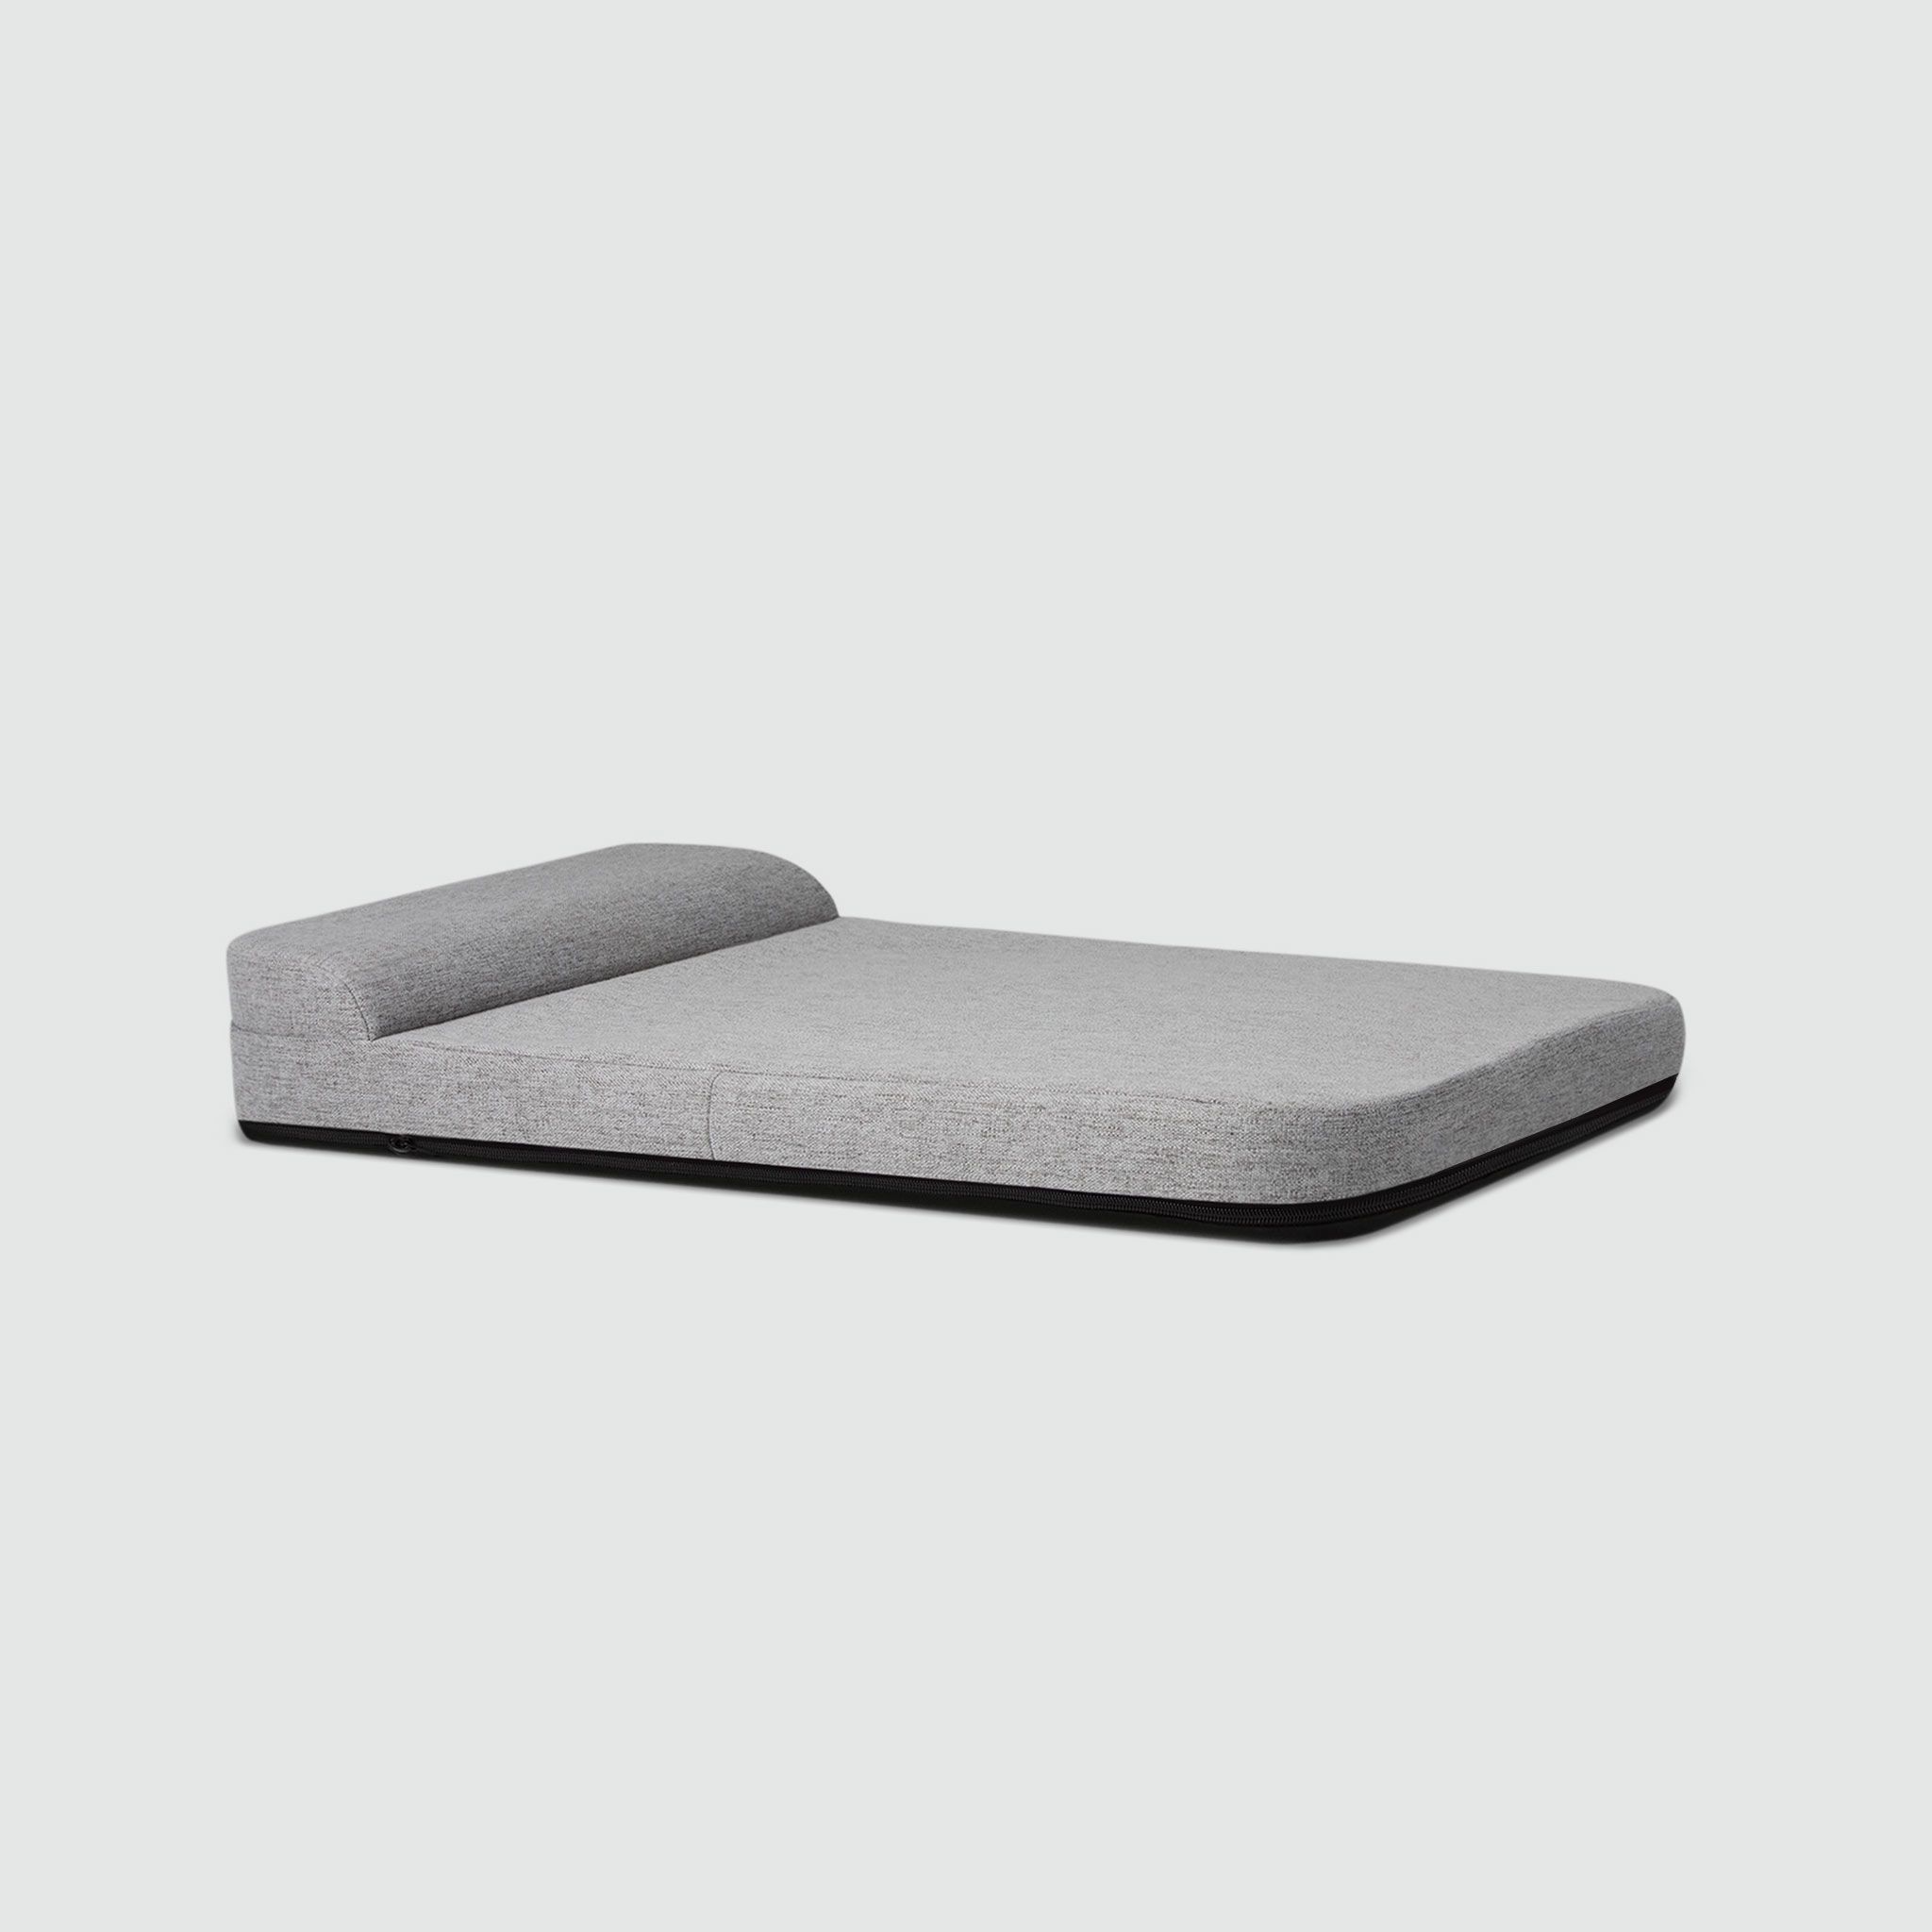 A bolstered dog bed with a grey cover